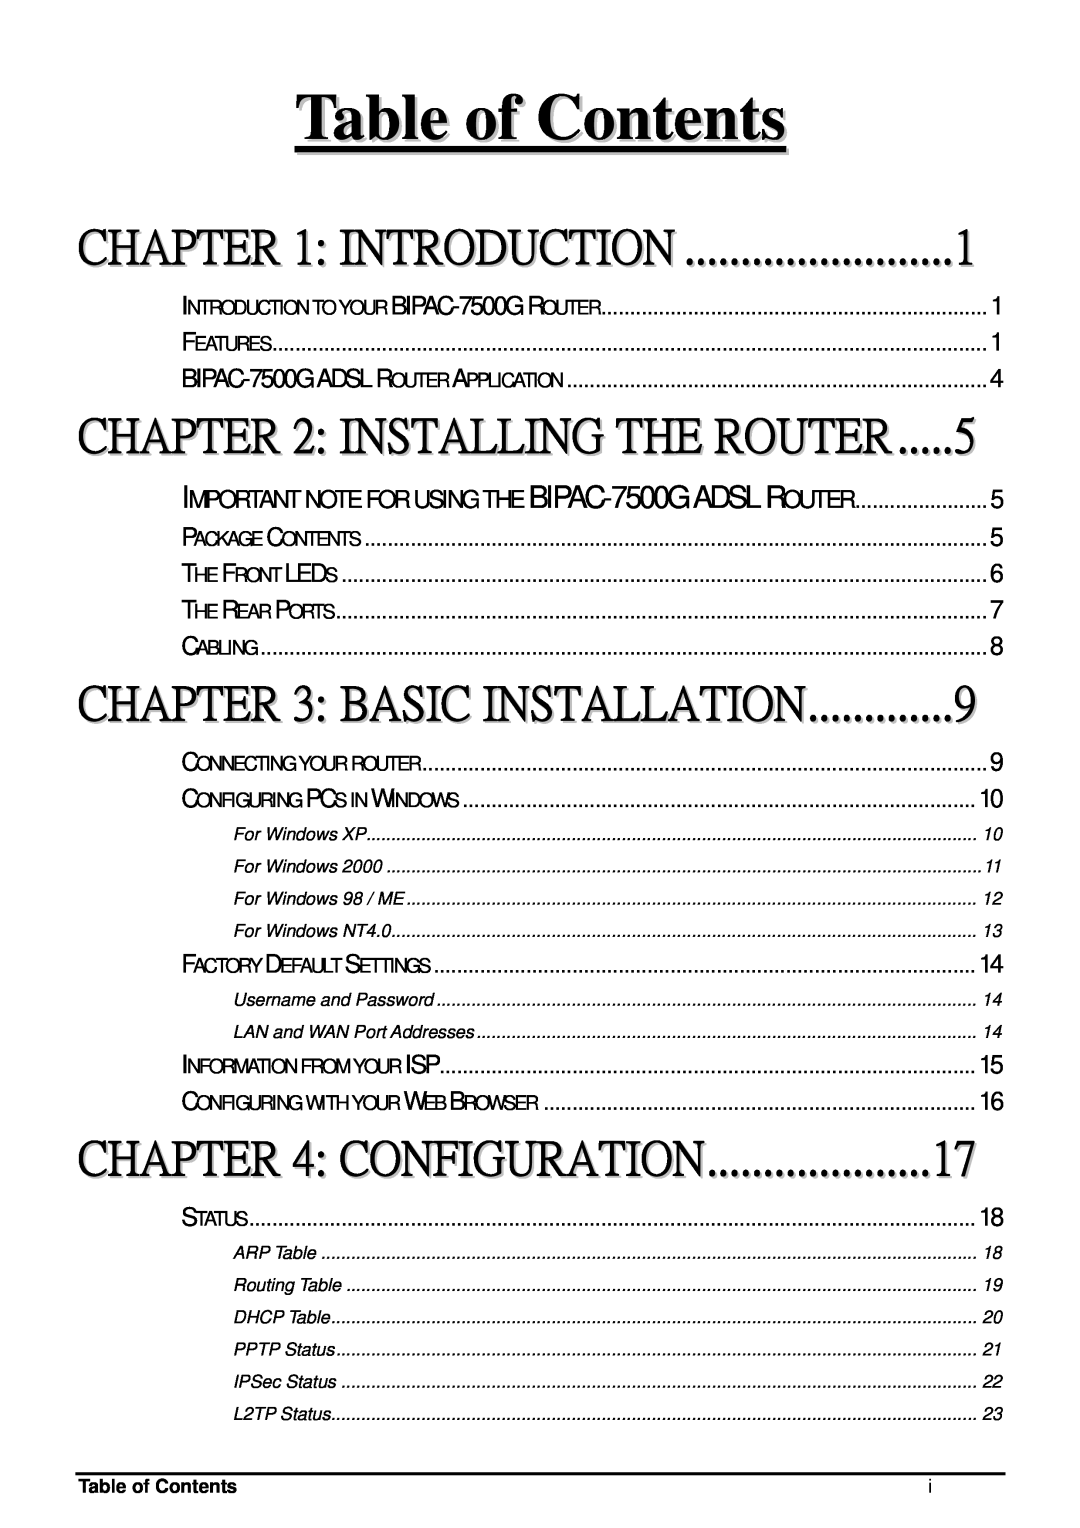 Billion Electric Company BIPAC-7500G user manual Table of Contents, Introduction, Installing The Router, Basic Installation 